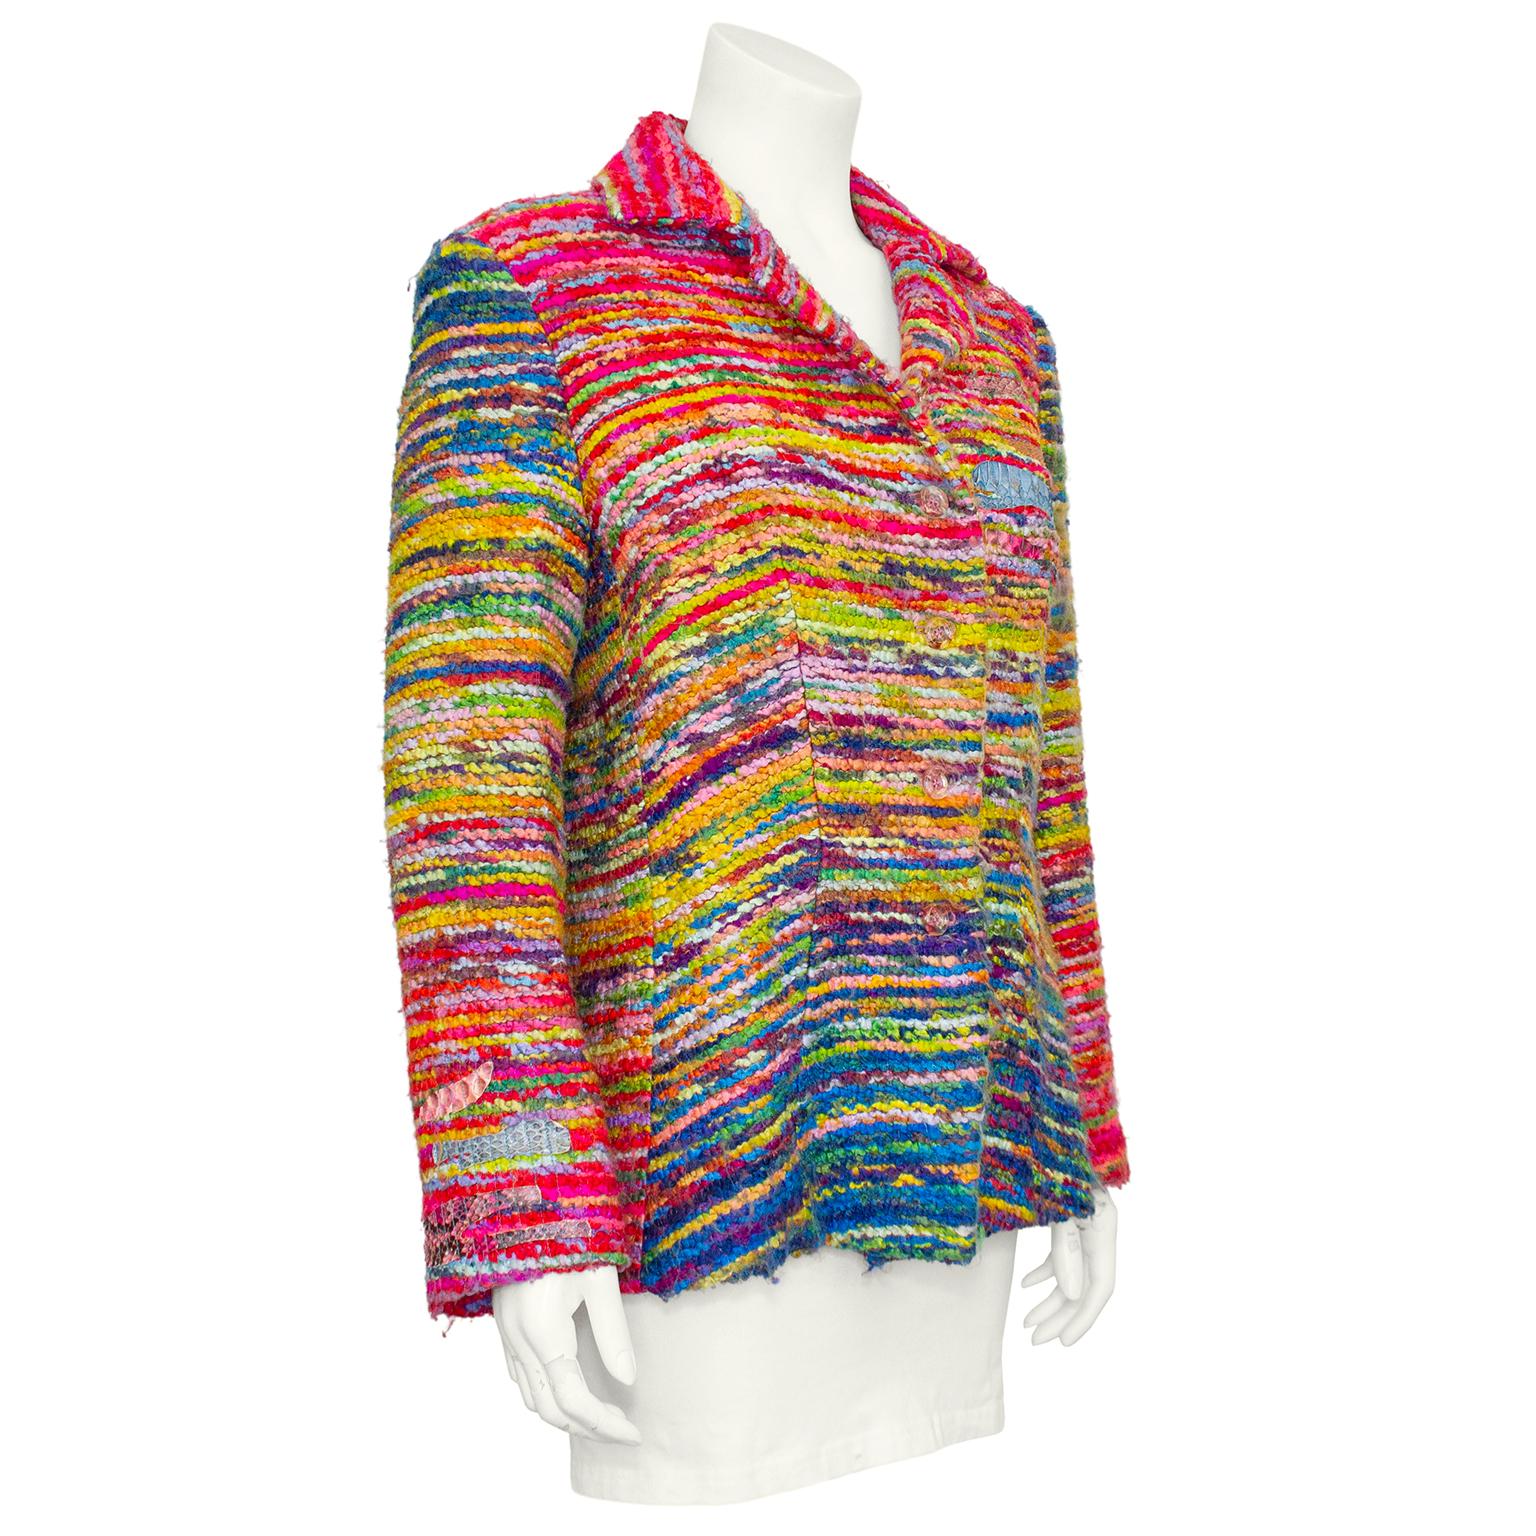 Christian Lacroix jacket from the 1990s. Bright multi-color variegated boucle with patches of bright colored faux reptile skin at the left shoulder and right cuff. Patches are further embellished with blue vertical top stitching. Round clear plastic